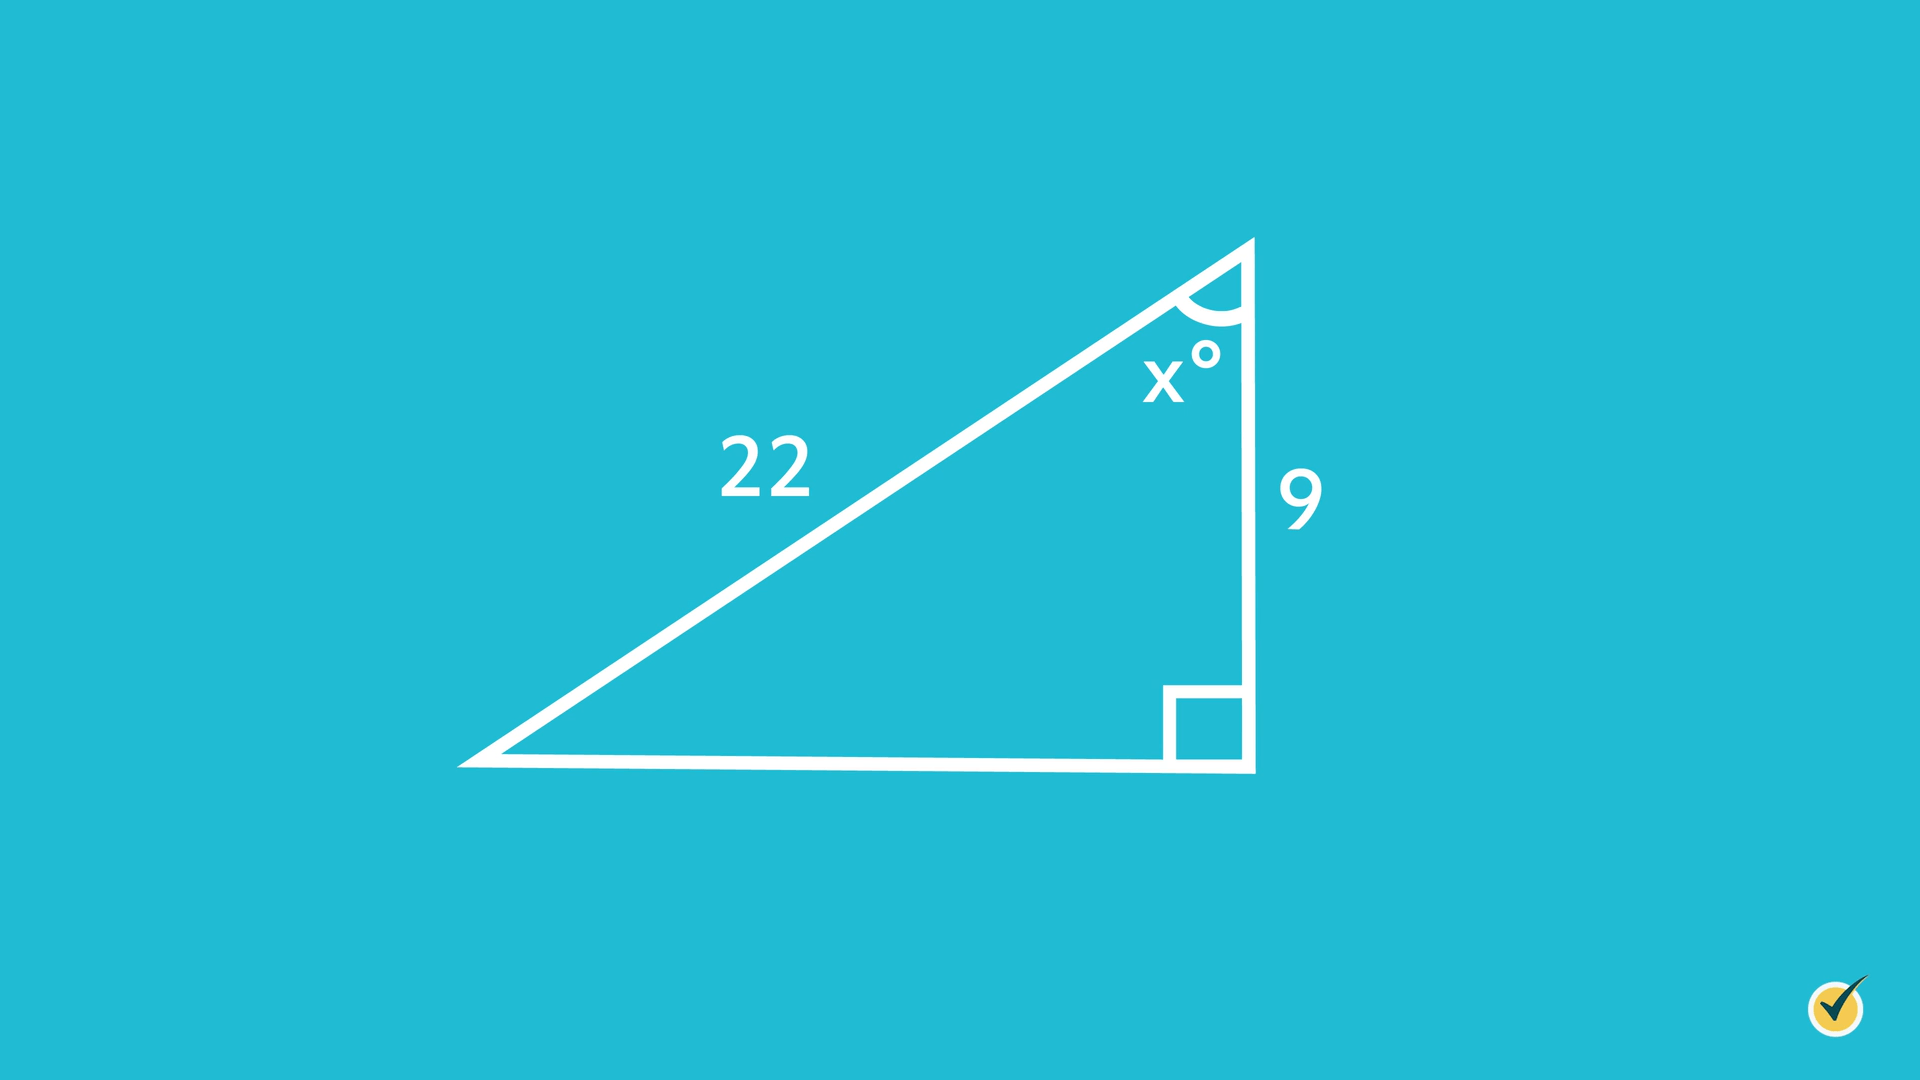 right triangle, left side hypotenuse 22, right side 9, top right angle x degrees, bottom right angle marked with a square